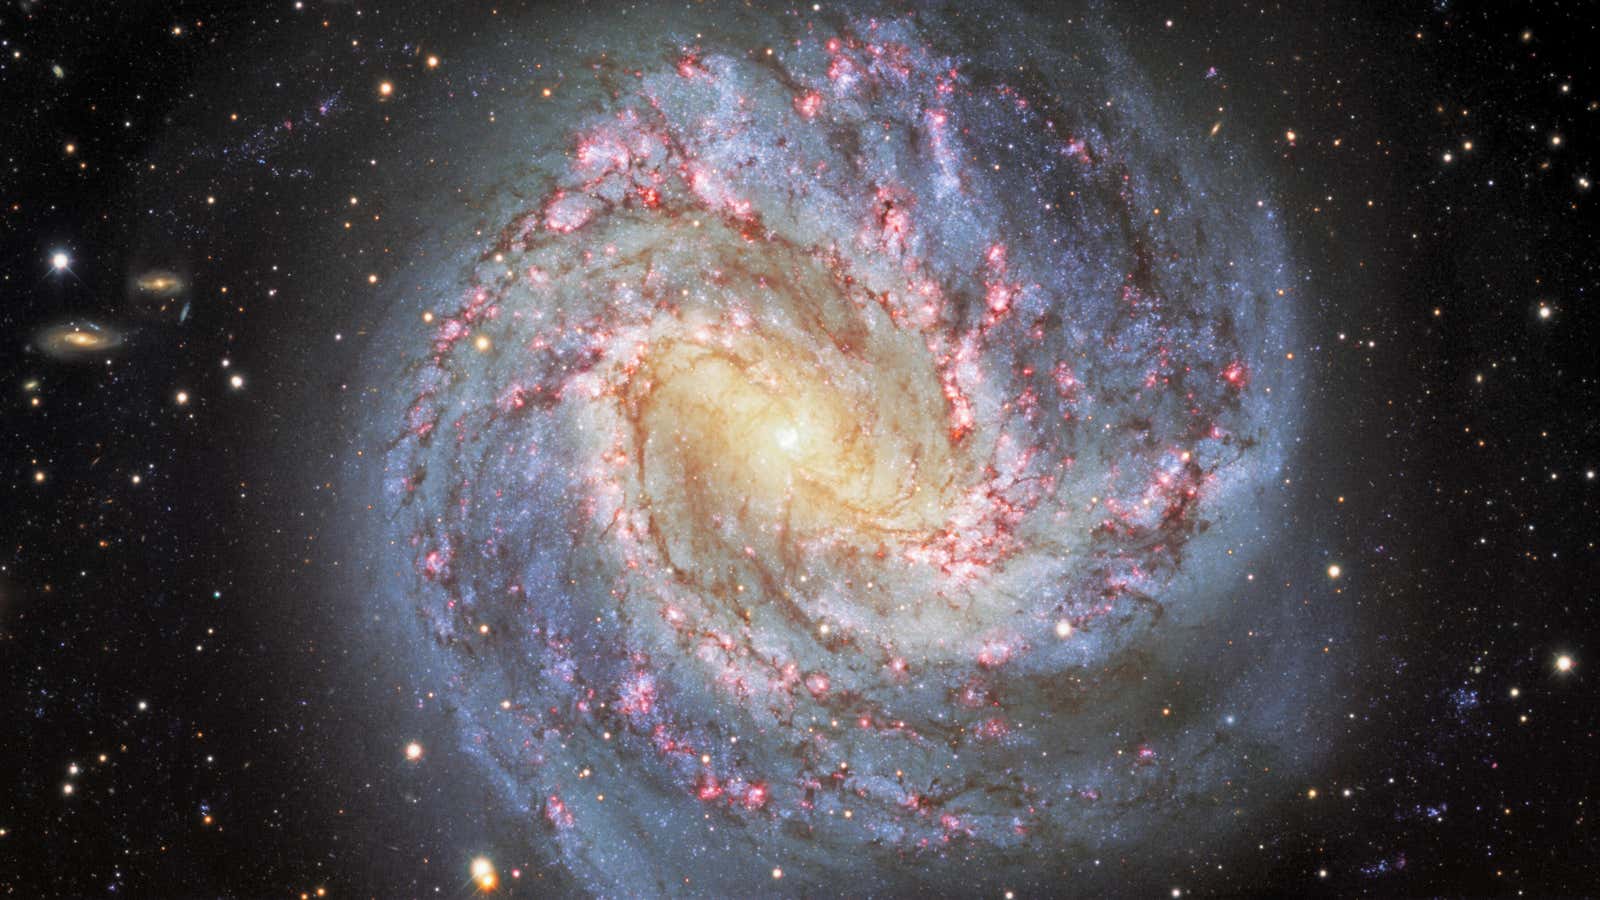 The Messier 83 spiral galaxy, located 15 million light-years away.